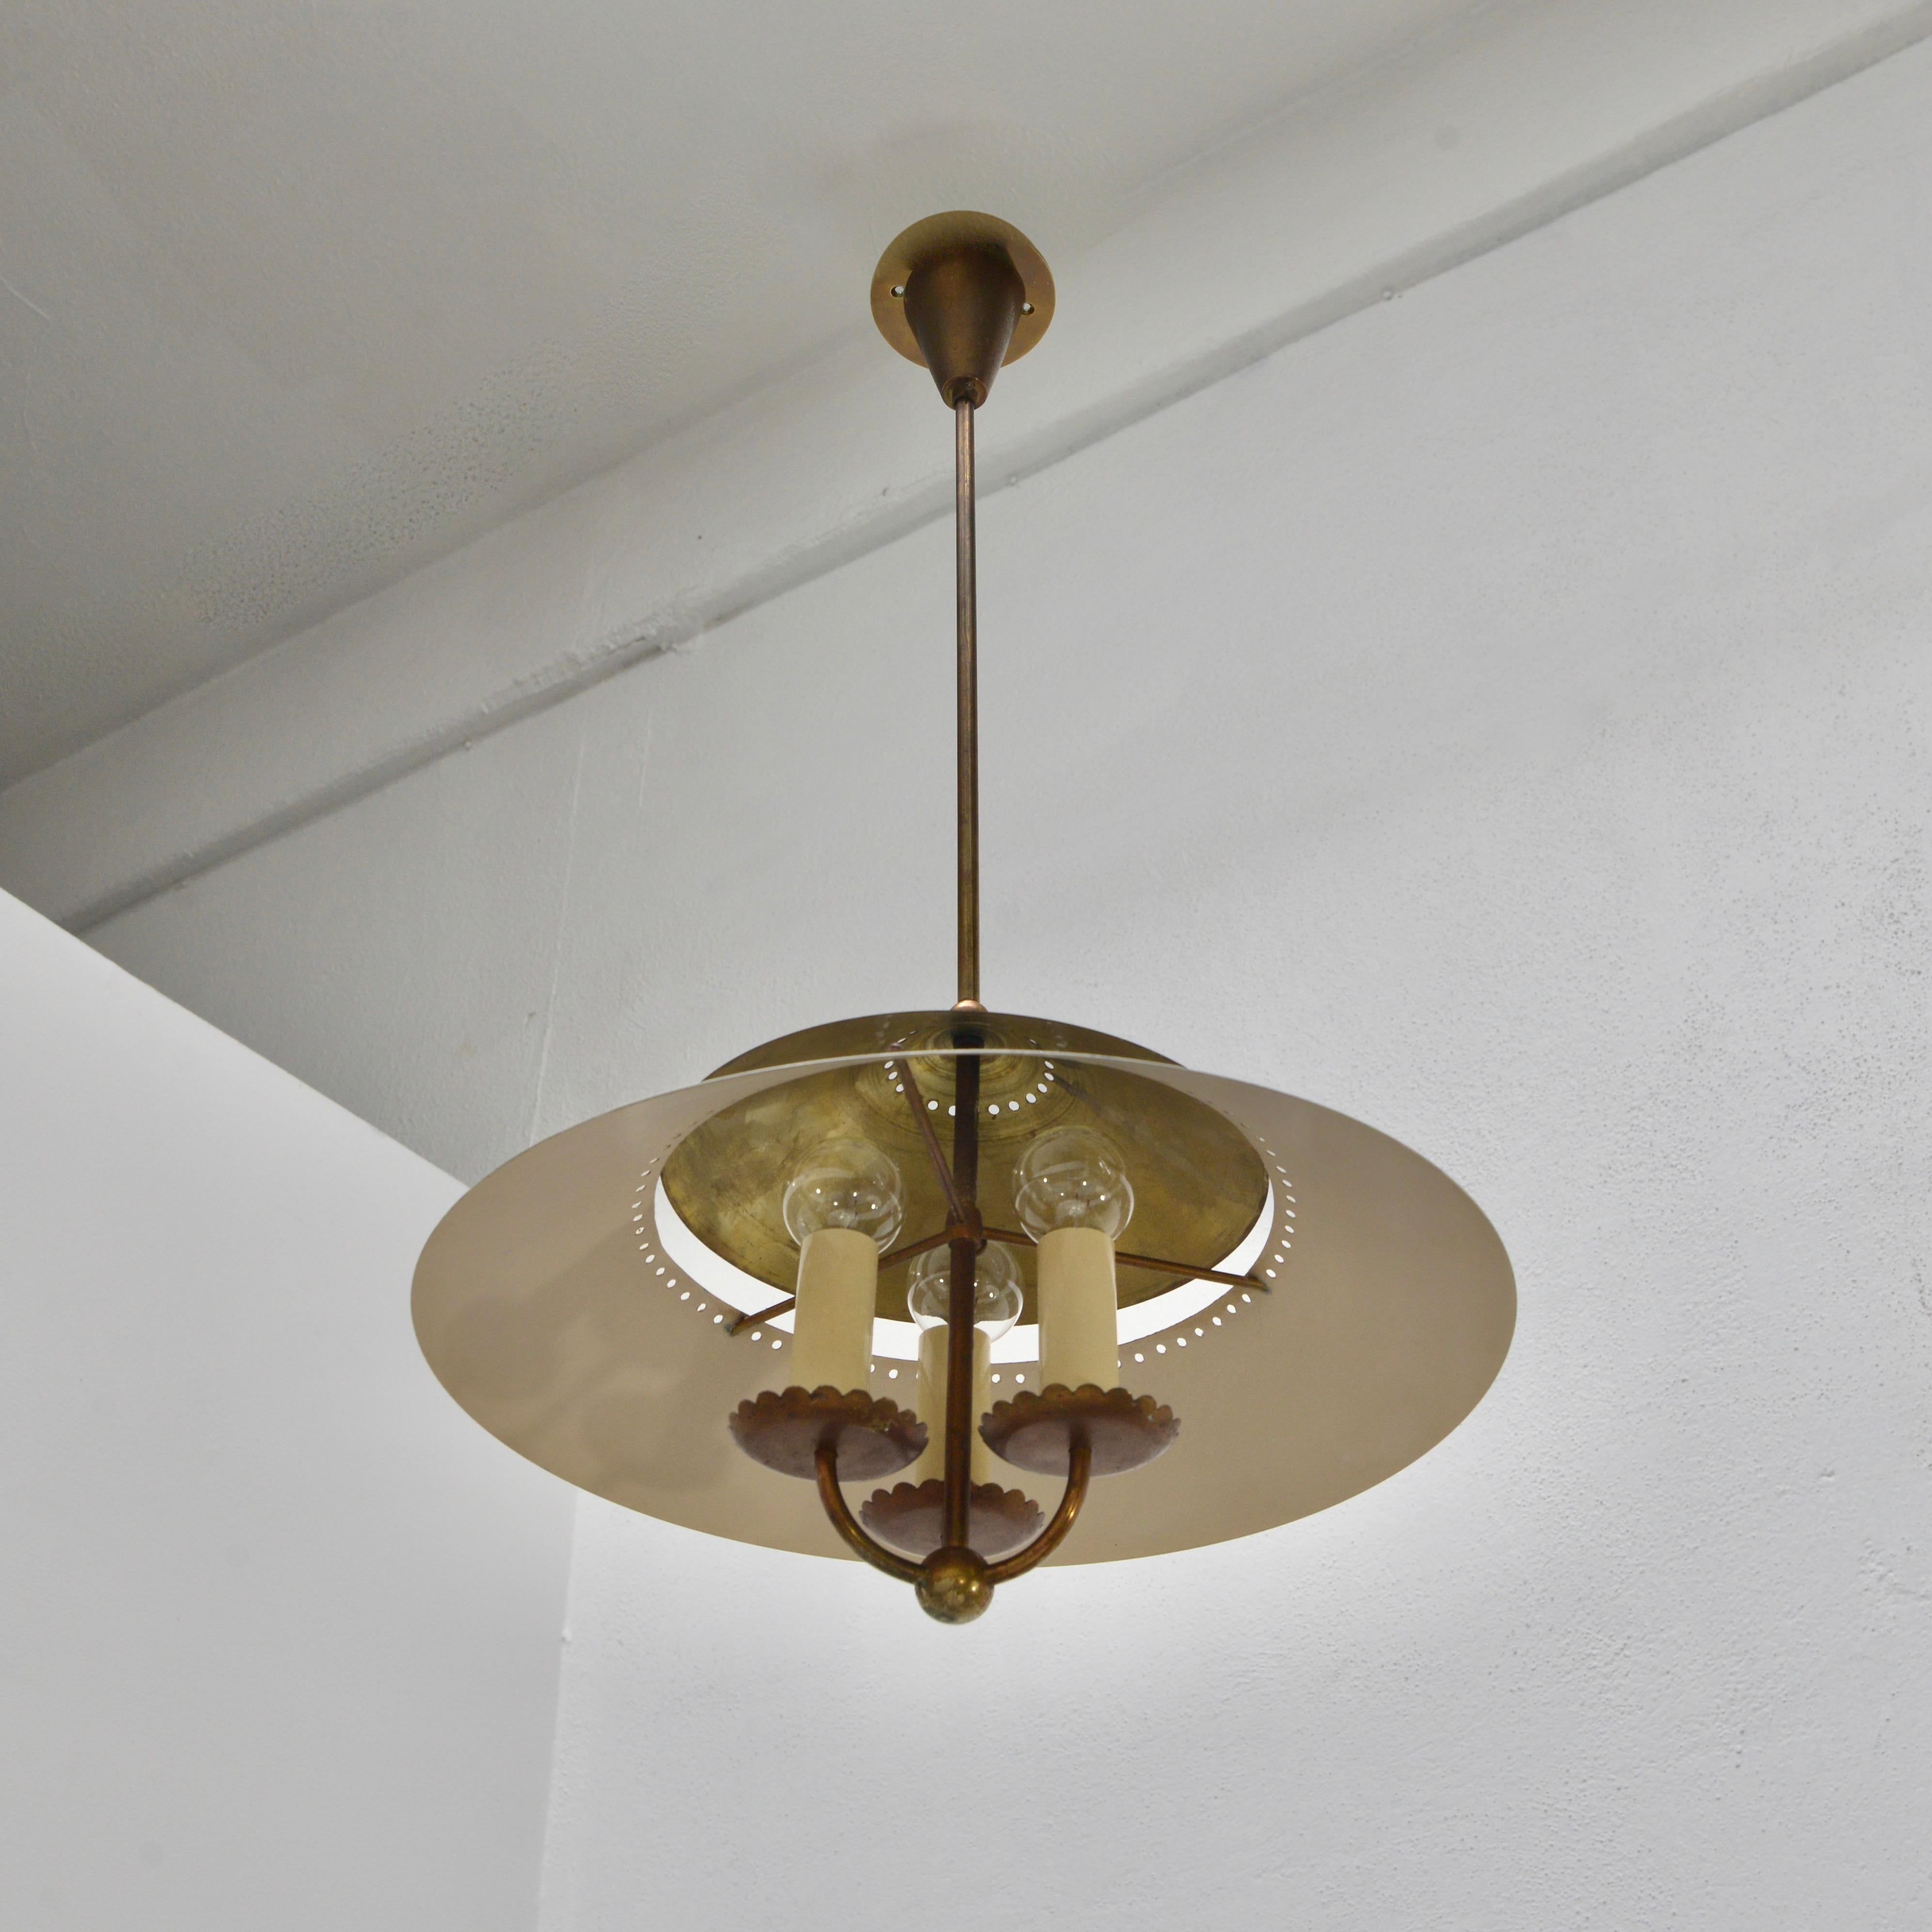 Beautiful 1940s Italian Botanical pendant. Partially restored brass and painted aluminum hardware. Wired with 3-candelabra based sockets and wired for use in the US. Light bulbs included with order.
Measurements:
OAD 30.5”
Diameter 17”
Fixture